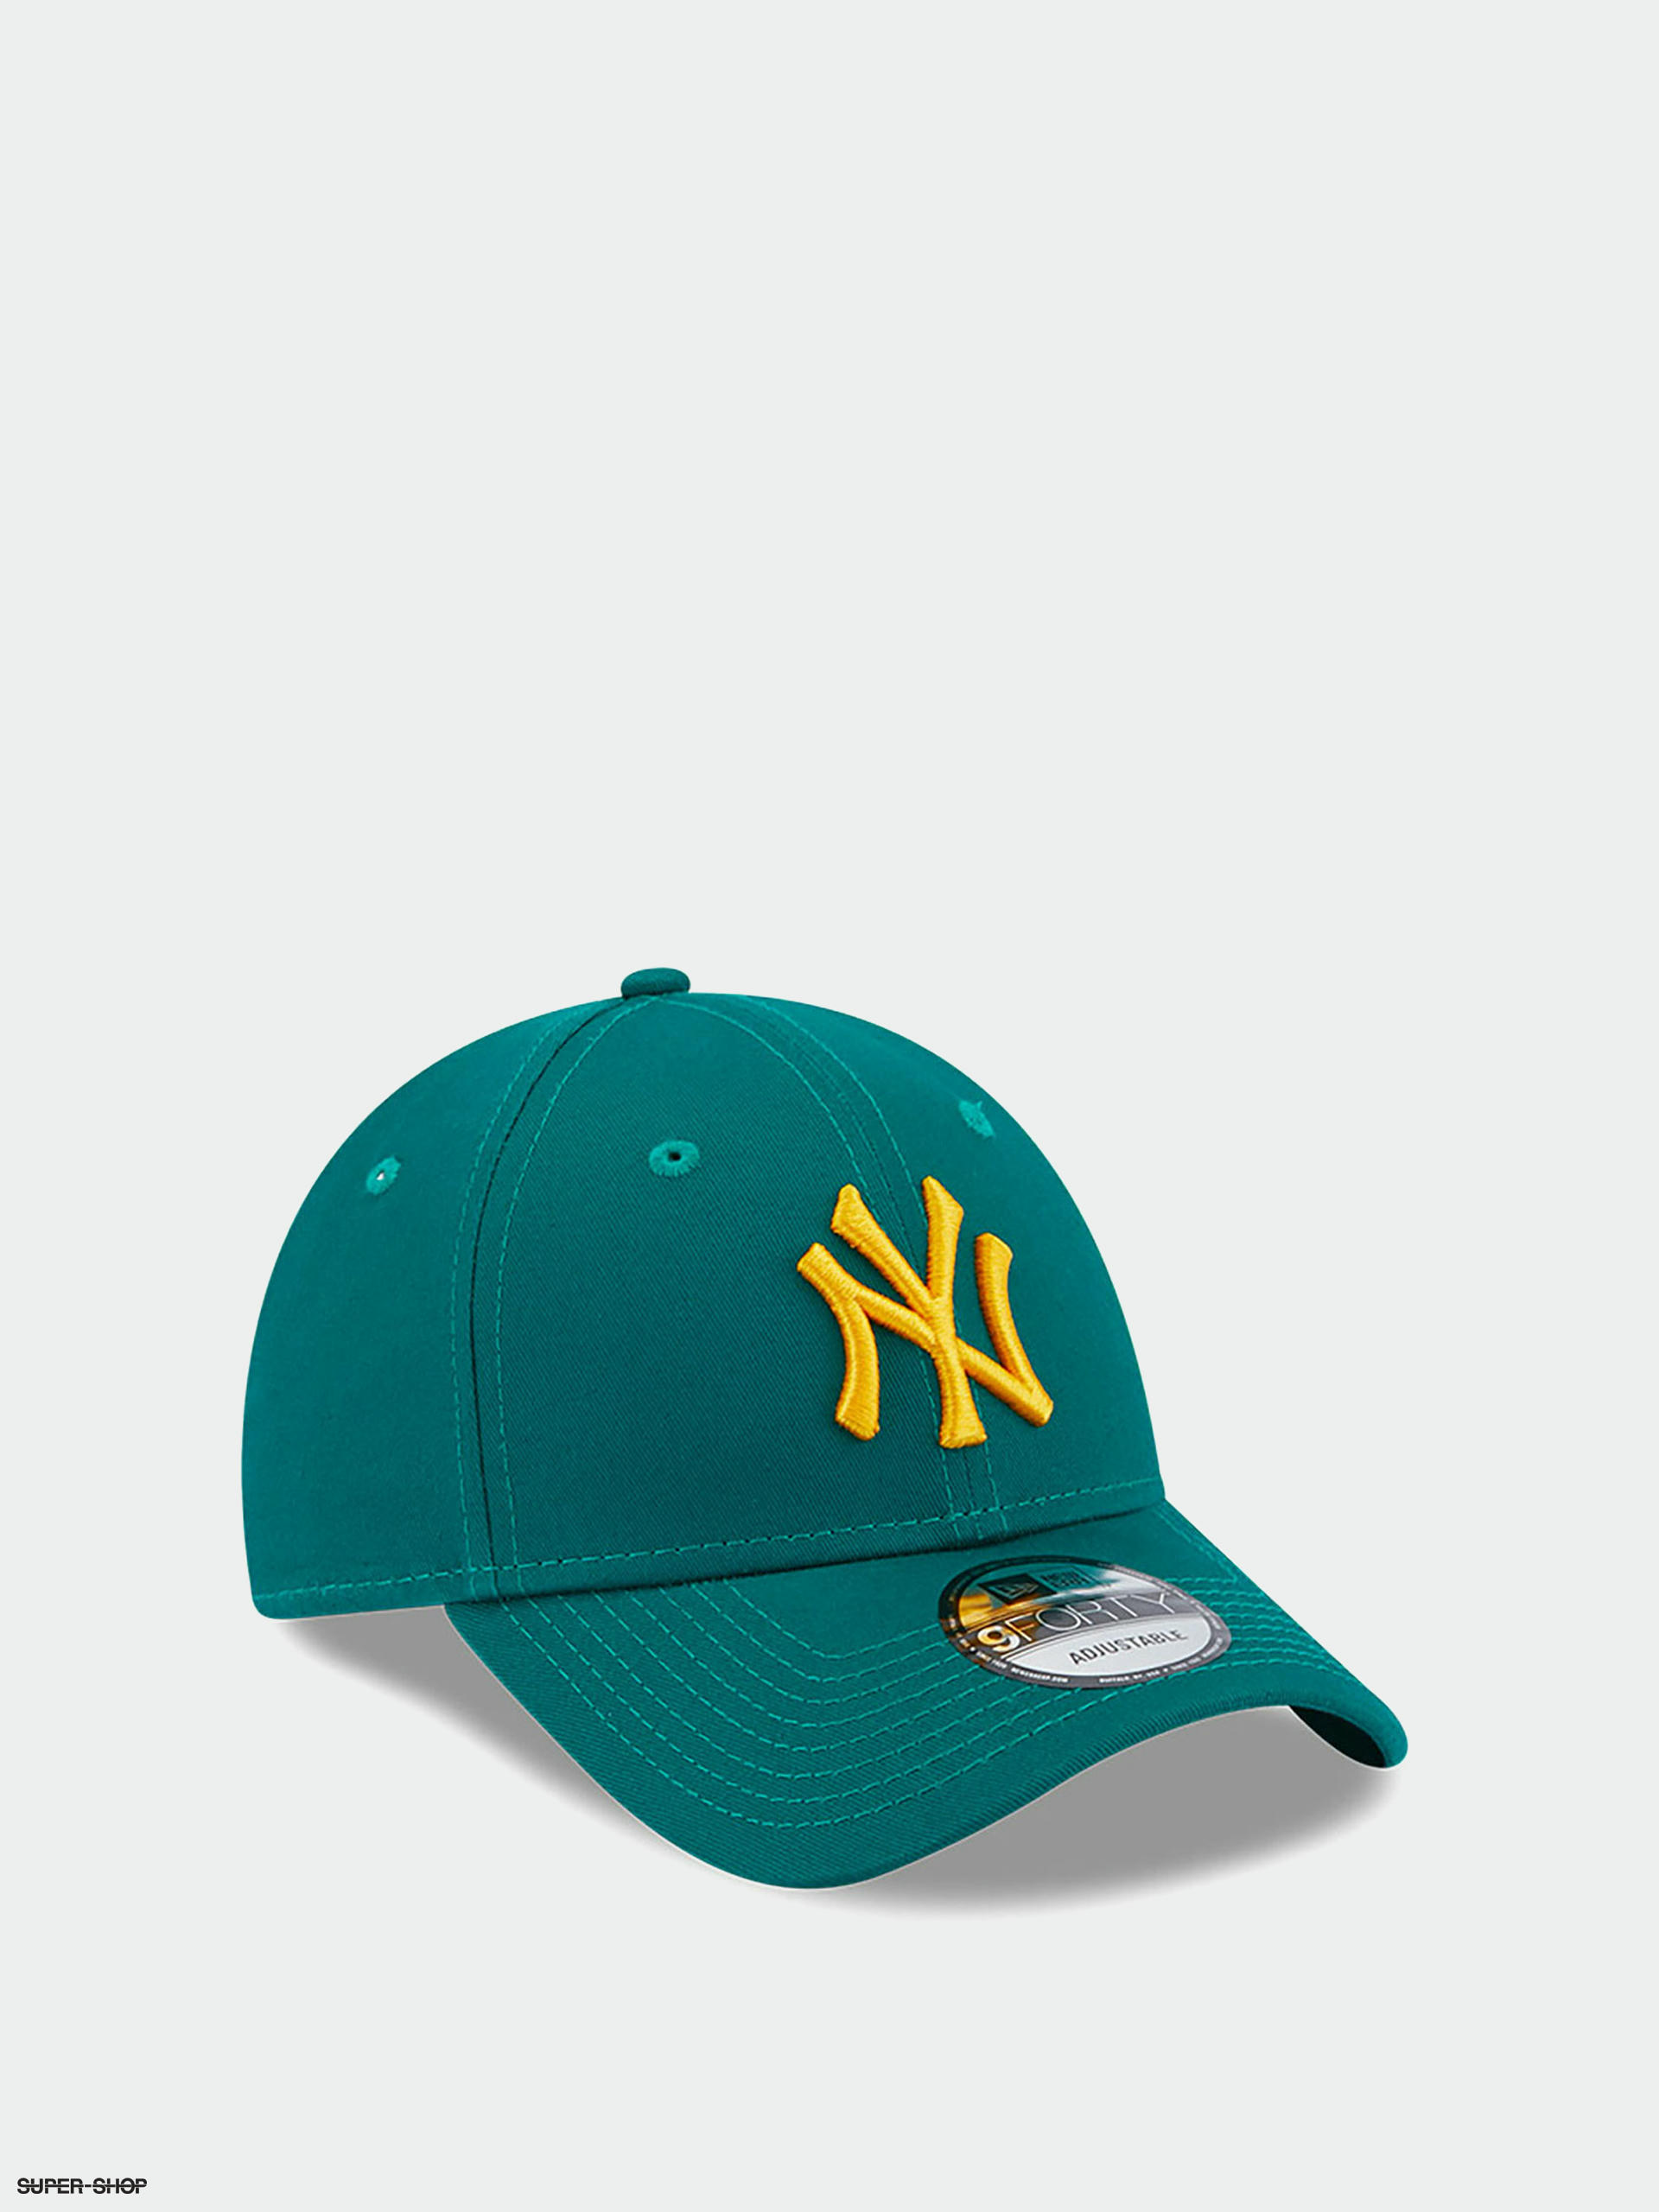 New York Yankees New Era St. Patrick's League 9FORTY Adjustable Hat - Green